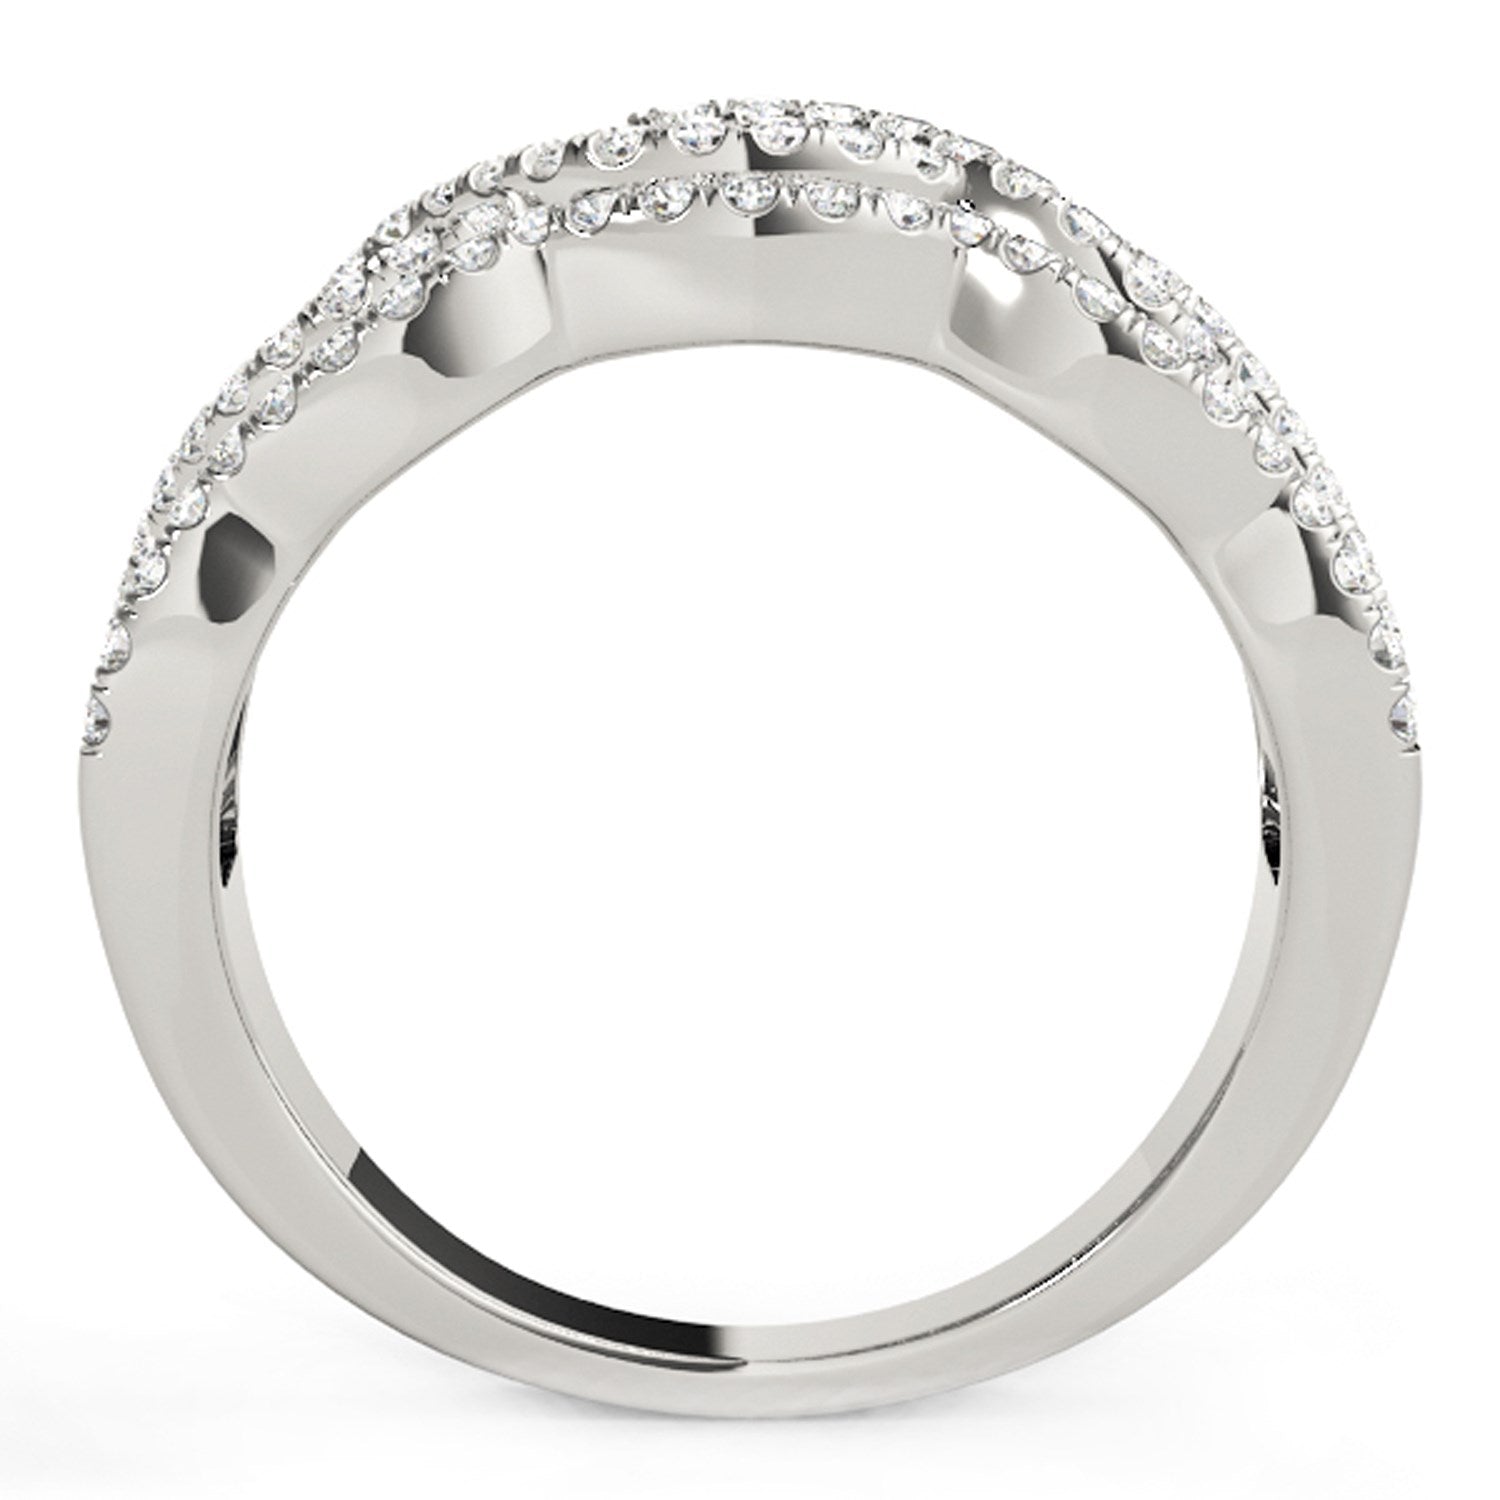 Diamond Studded Ring with Four Curves in 14k White Gold (5/8 cttw)